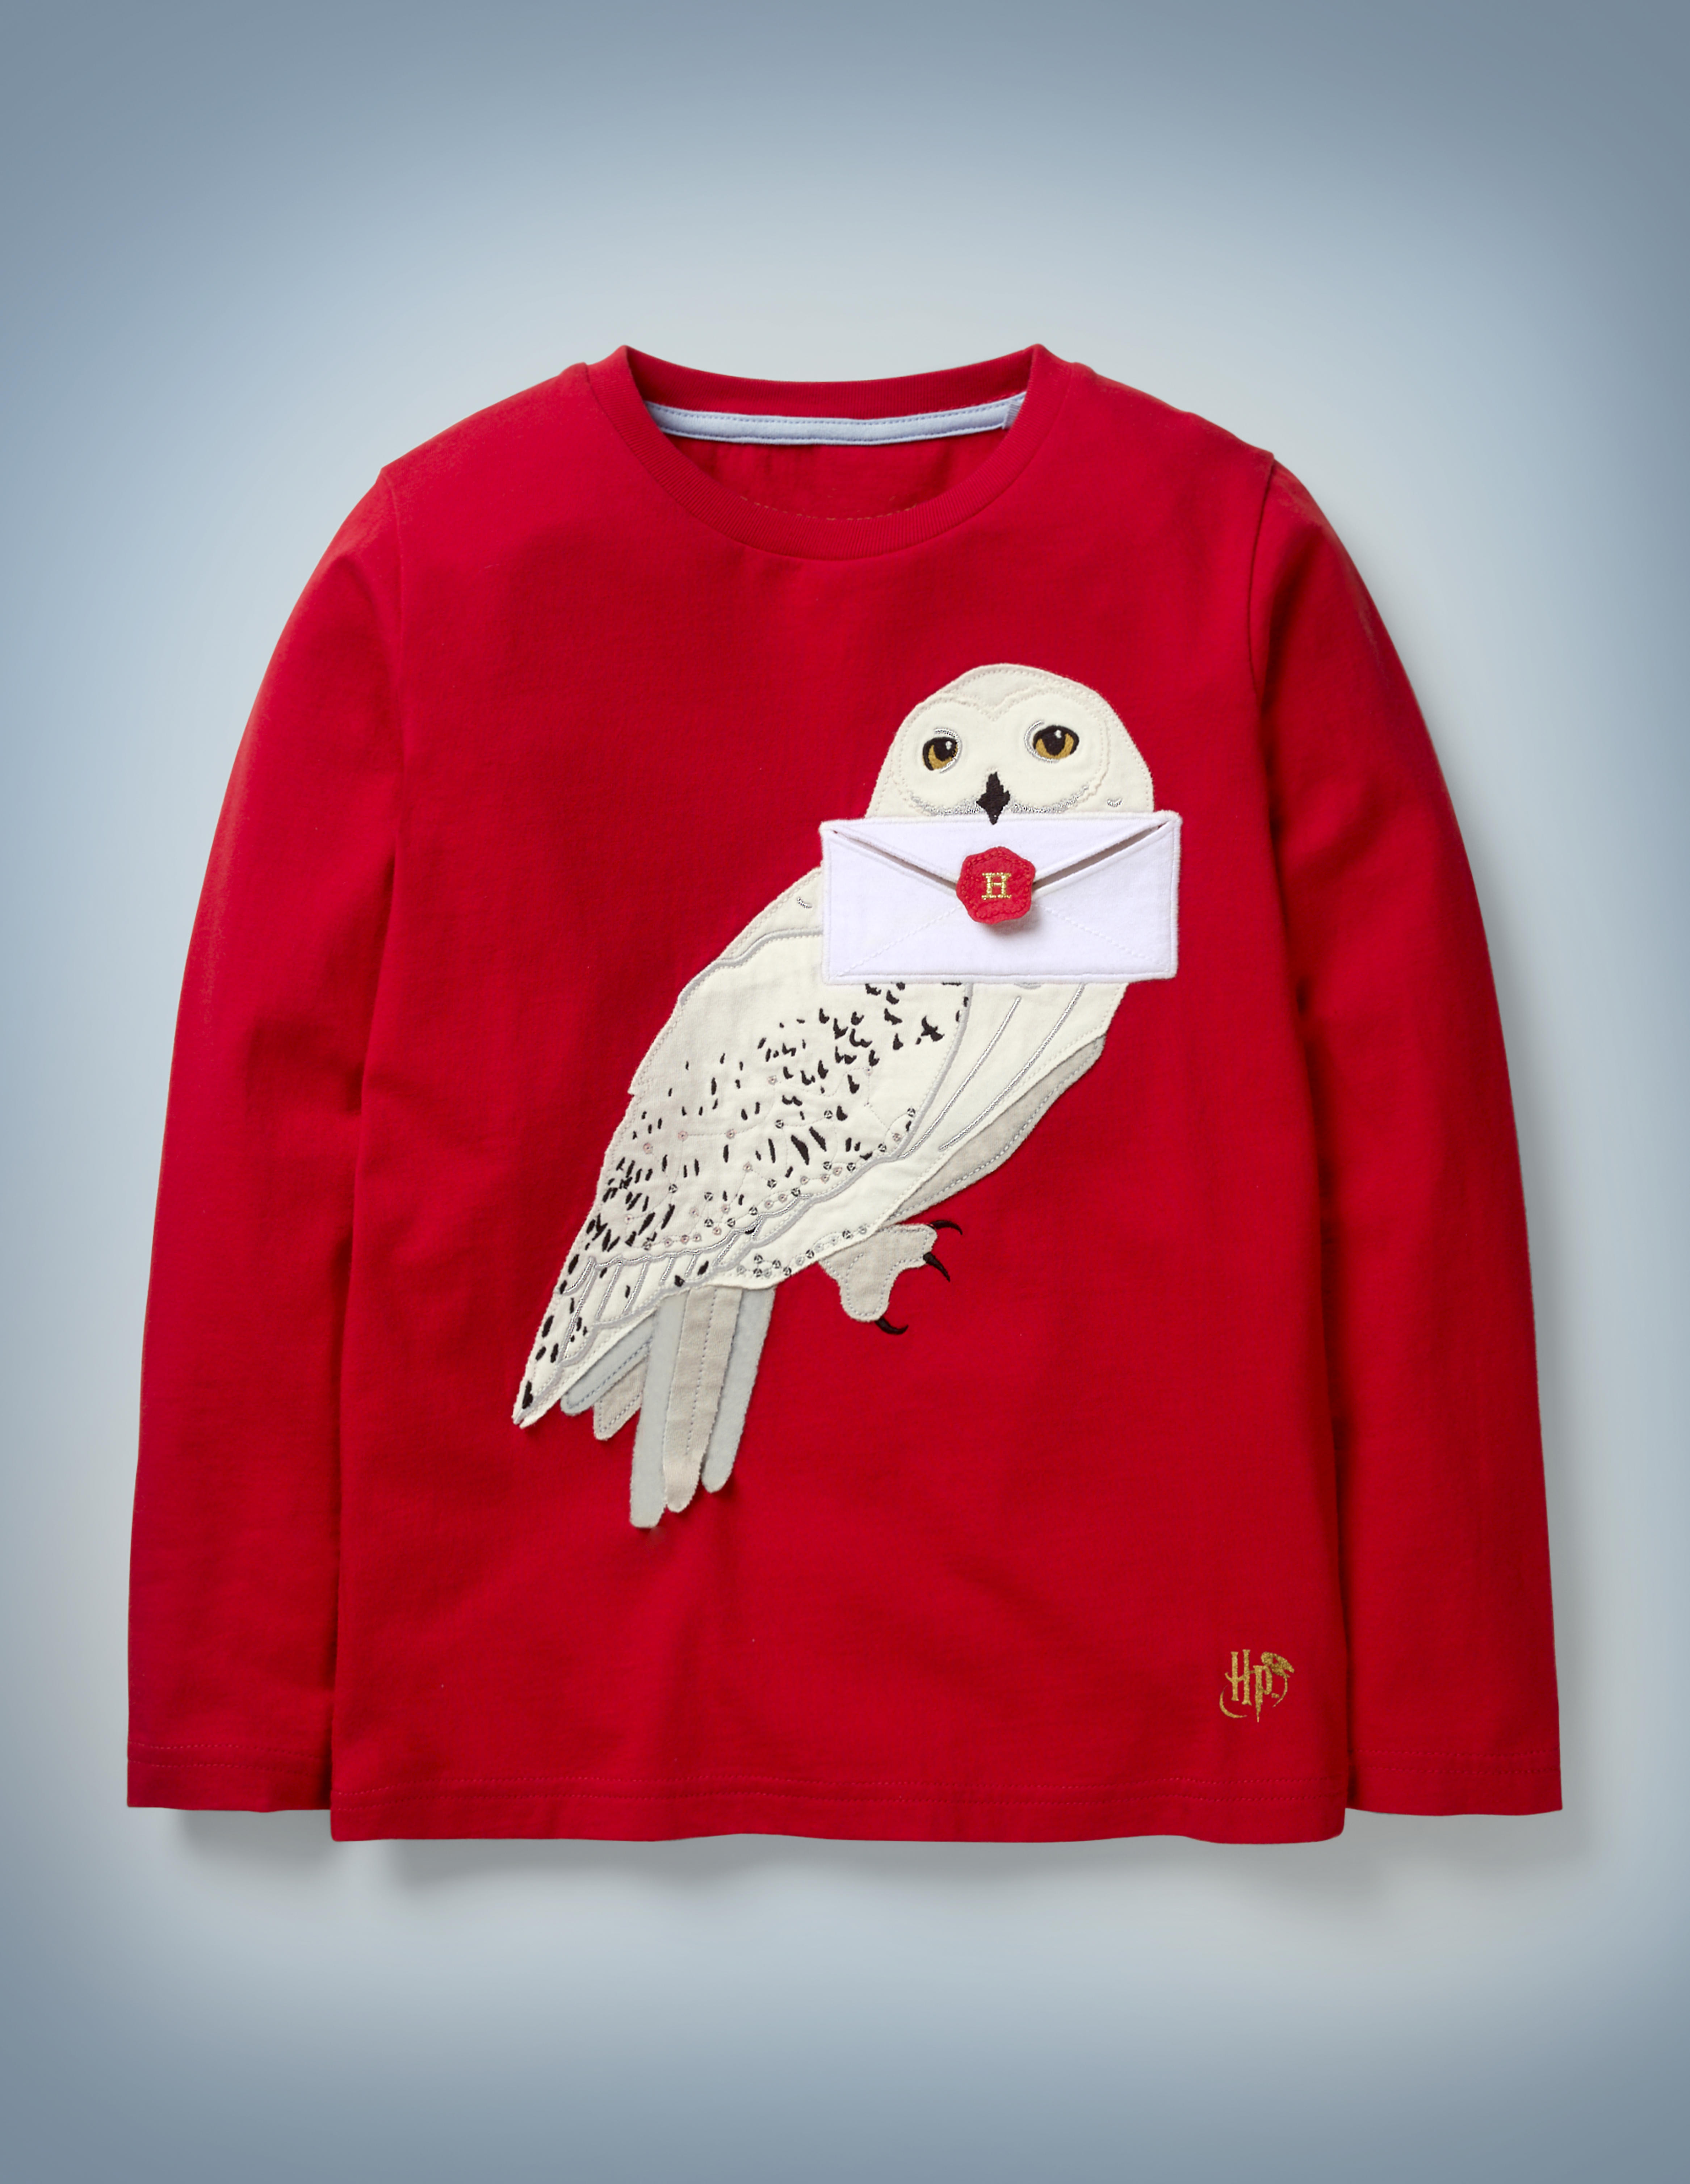 The Mini Boden Hedwig Appliqué T-shirt in red features an appliqué design of Harry Potter’s beloved owl holding a Hogwarts acceptance letter in her beak. The shirt retails at £22.